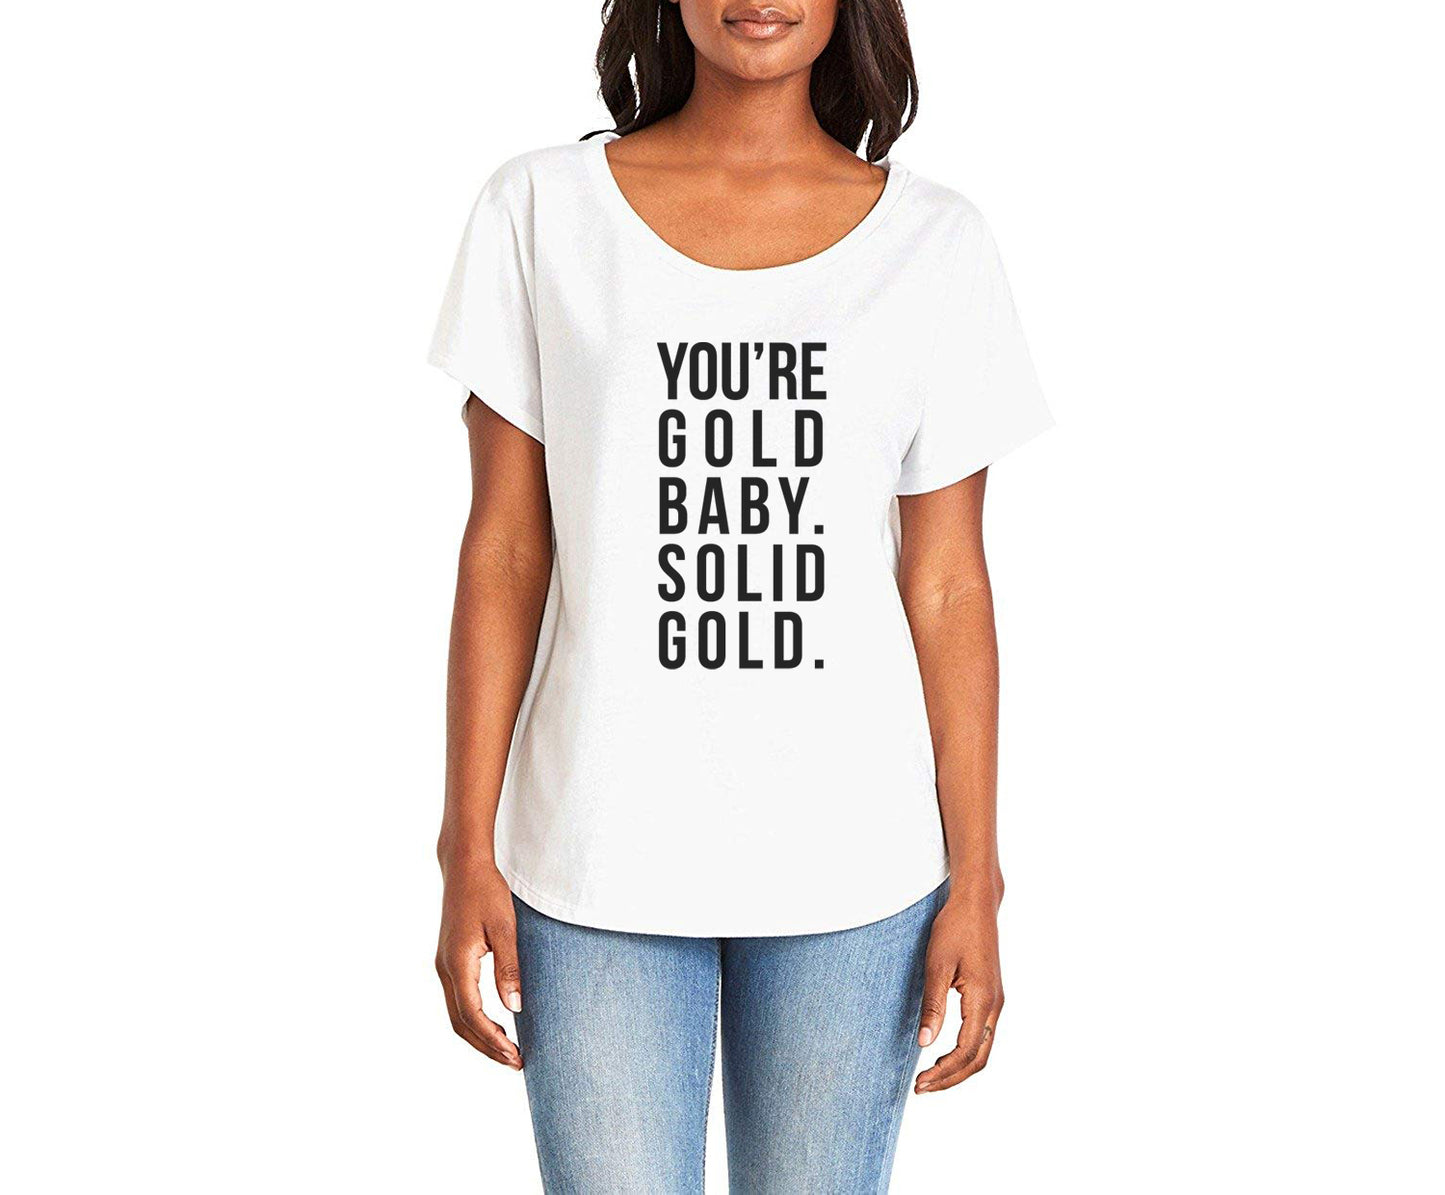 You're Gold Baby. Solid Gold. Ladies Tee Shirt - In Grey & White